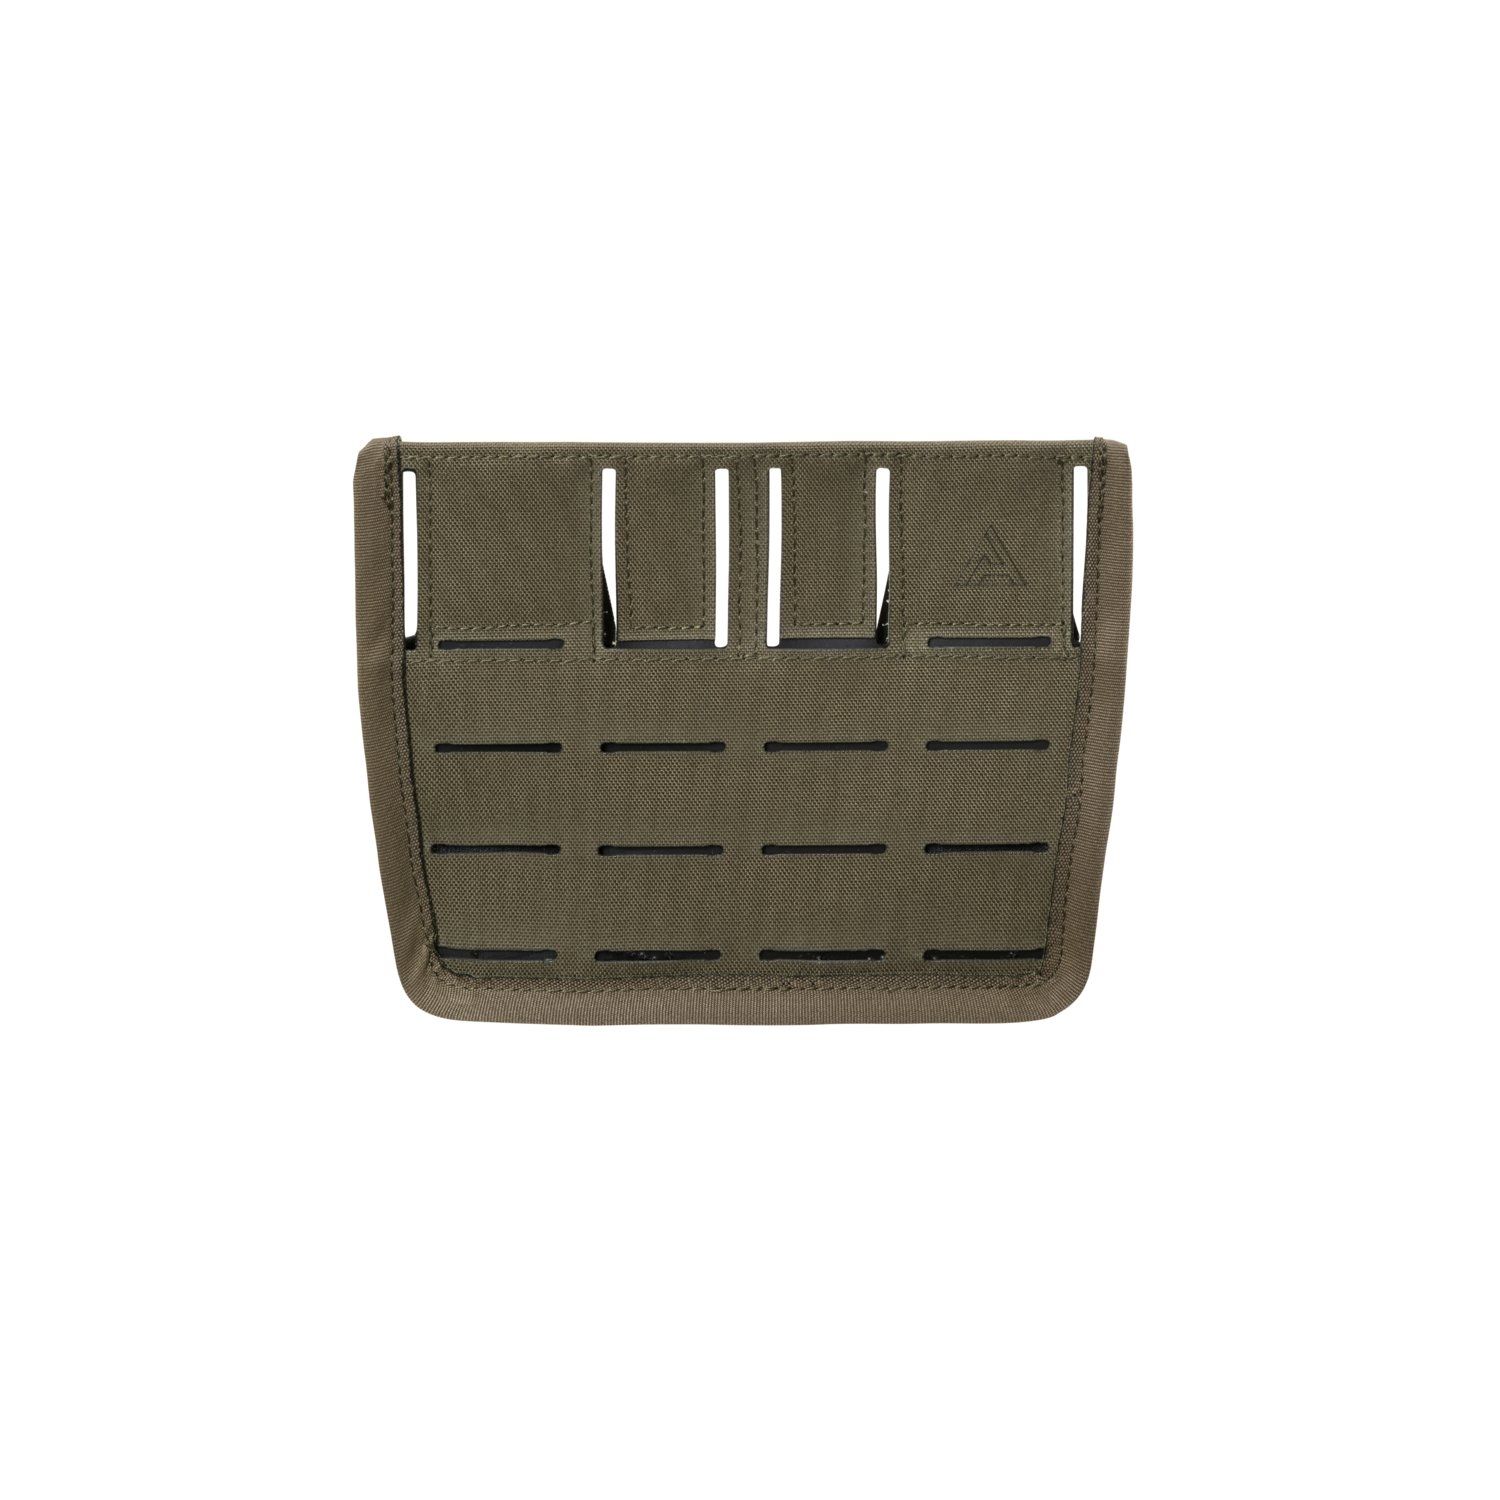 Image of Panel MOSQUITO DIRECT ACTION HIP PANEL S - Cordura - Ranger Green - One Size (PL-MQPS-CD5-RGR)